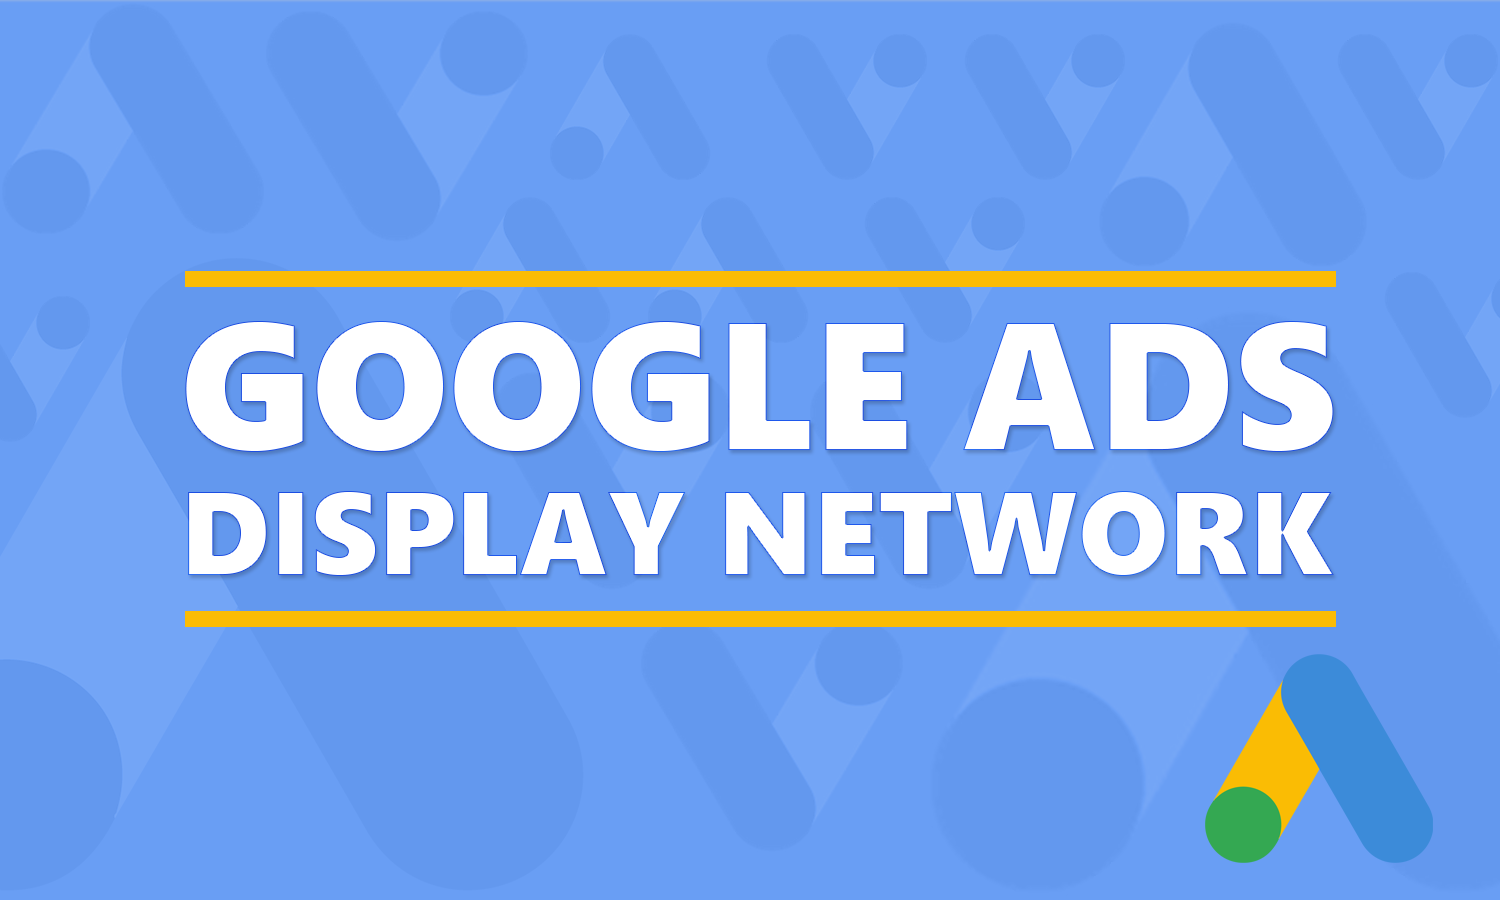 what is the google ads display network